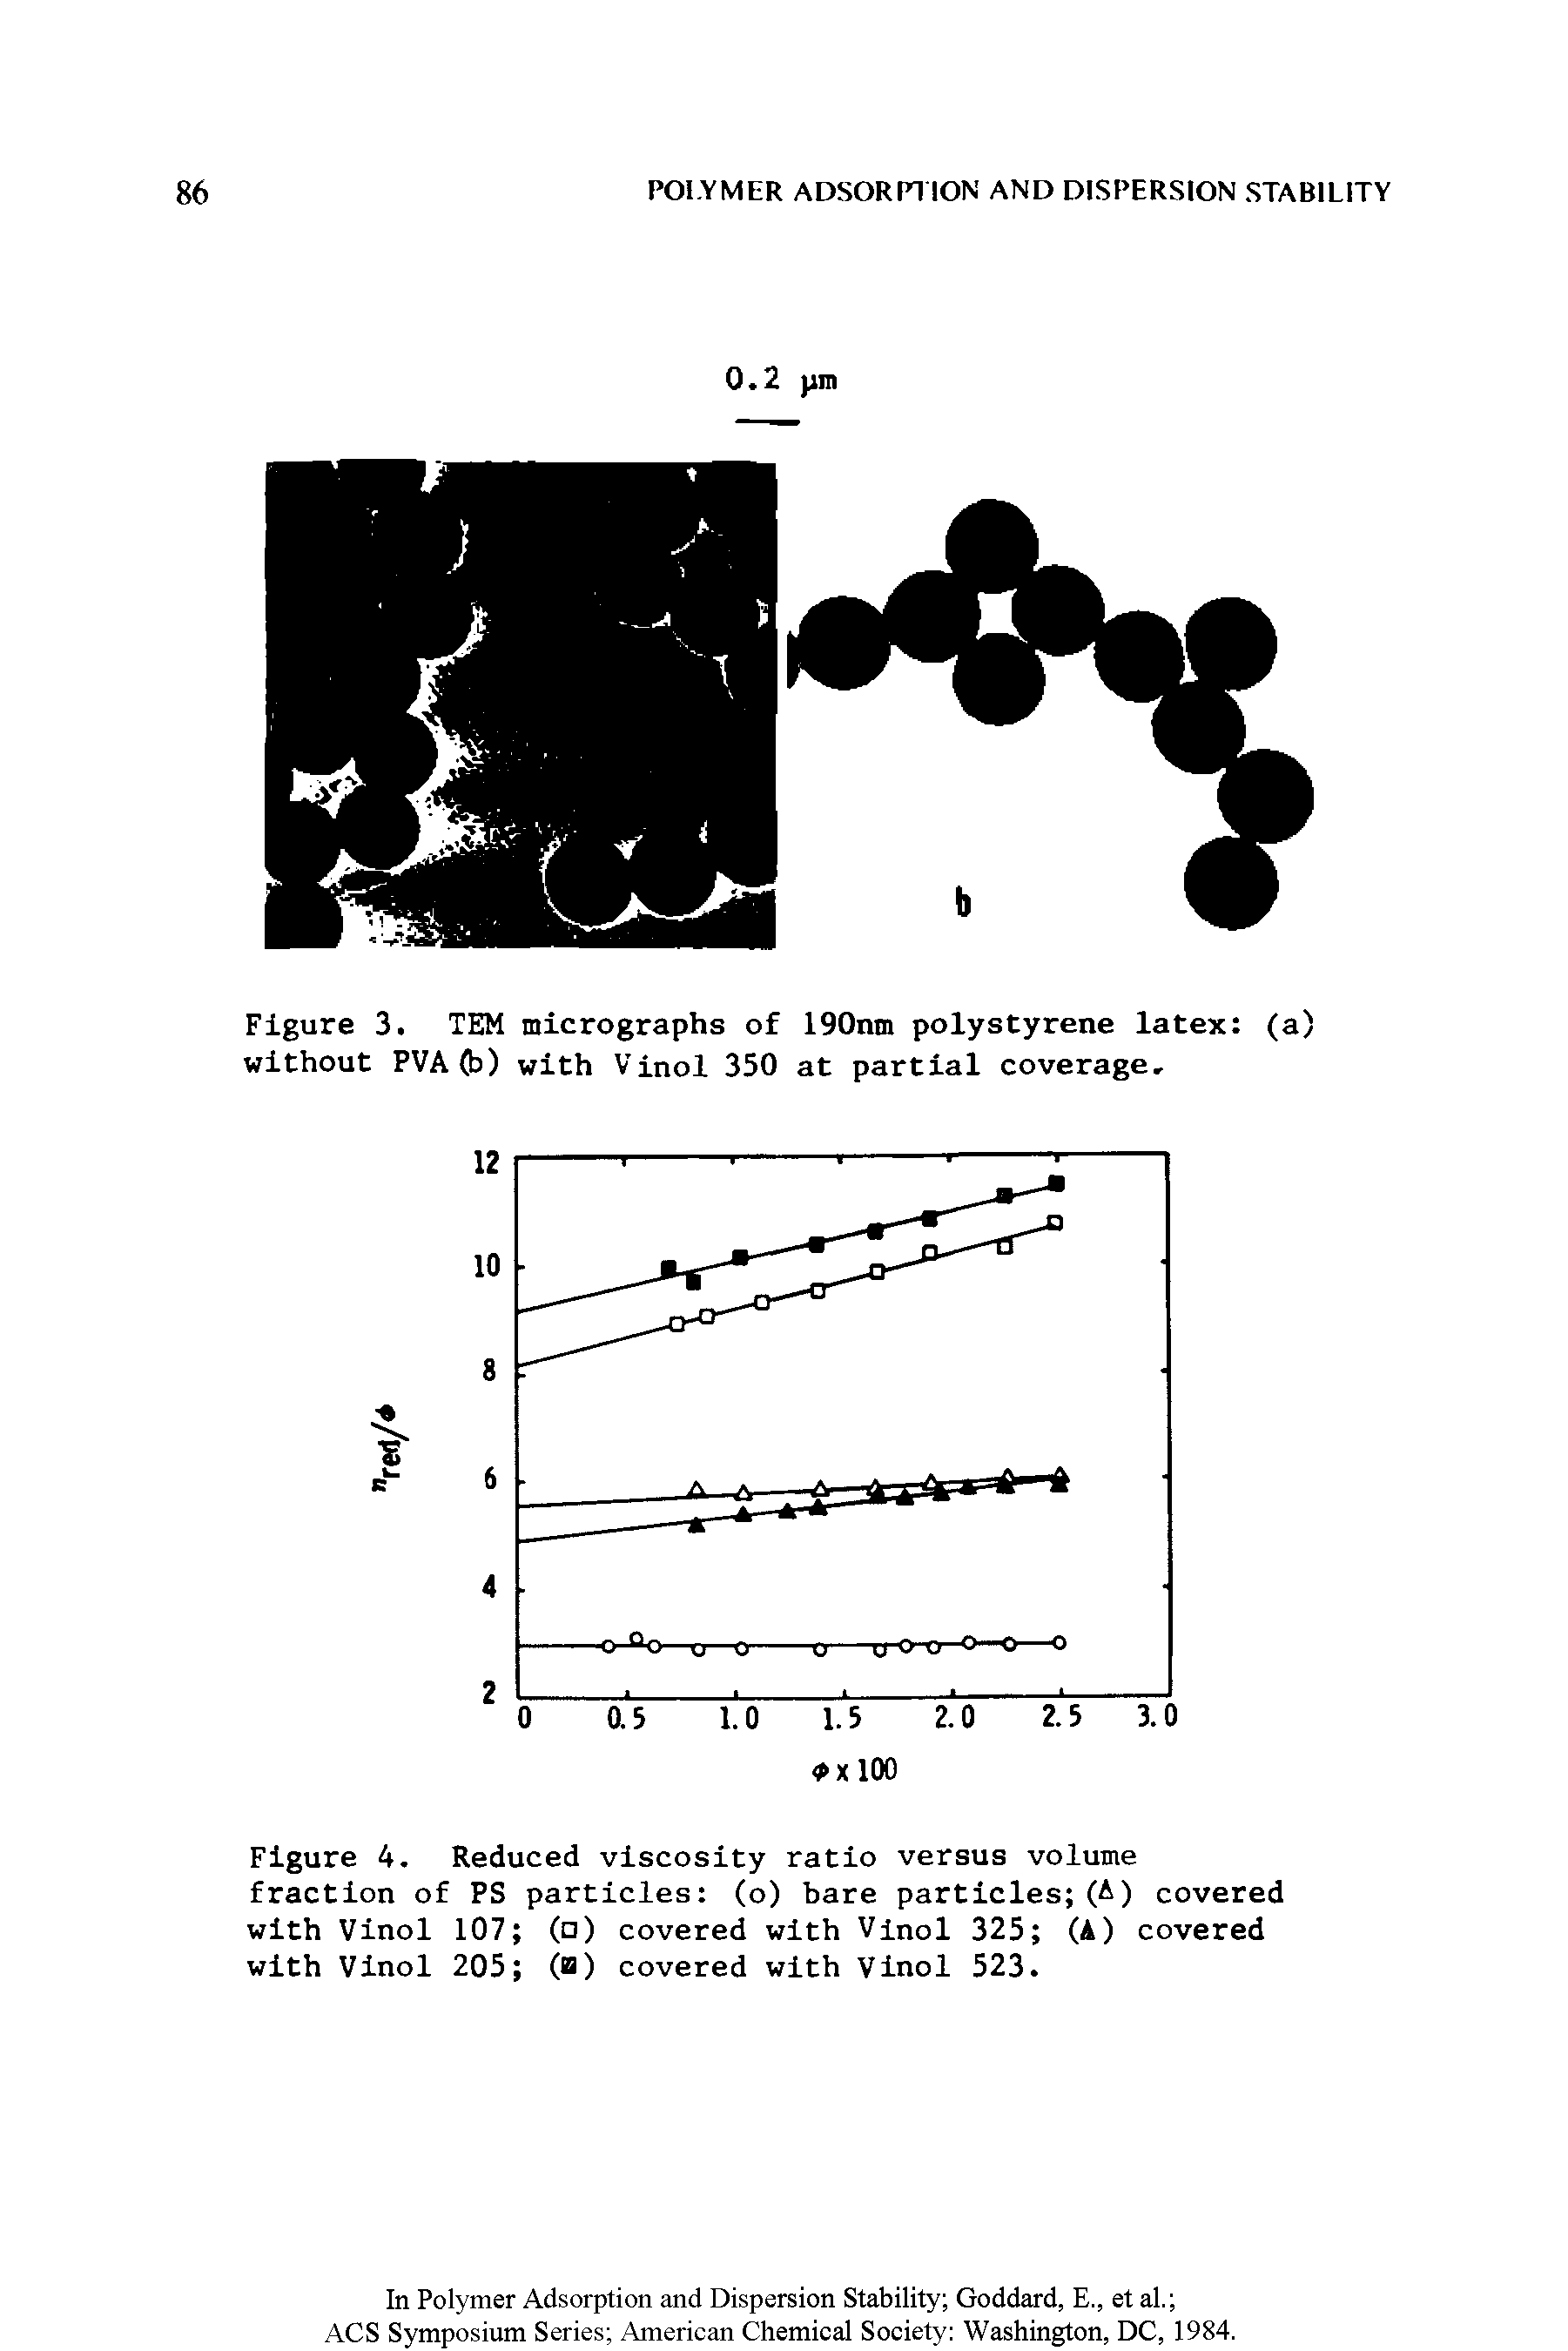 Figure 4. Reduced viscosity ratio versus volume fraction of PS particles (o) bare particles (A) covered with Vinol 107 ( ) covered with Vinol 325 (A) covered with Vinol 205 (a) covered with Vinol 523.